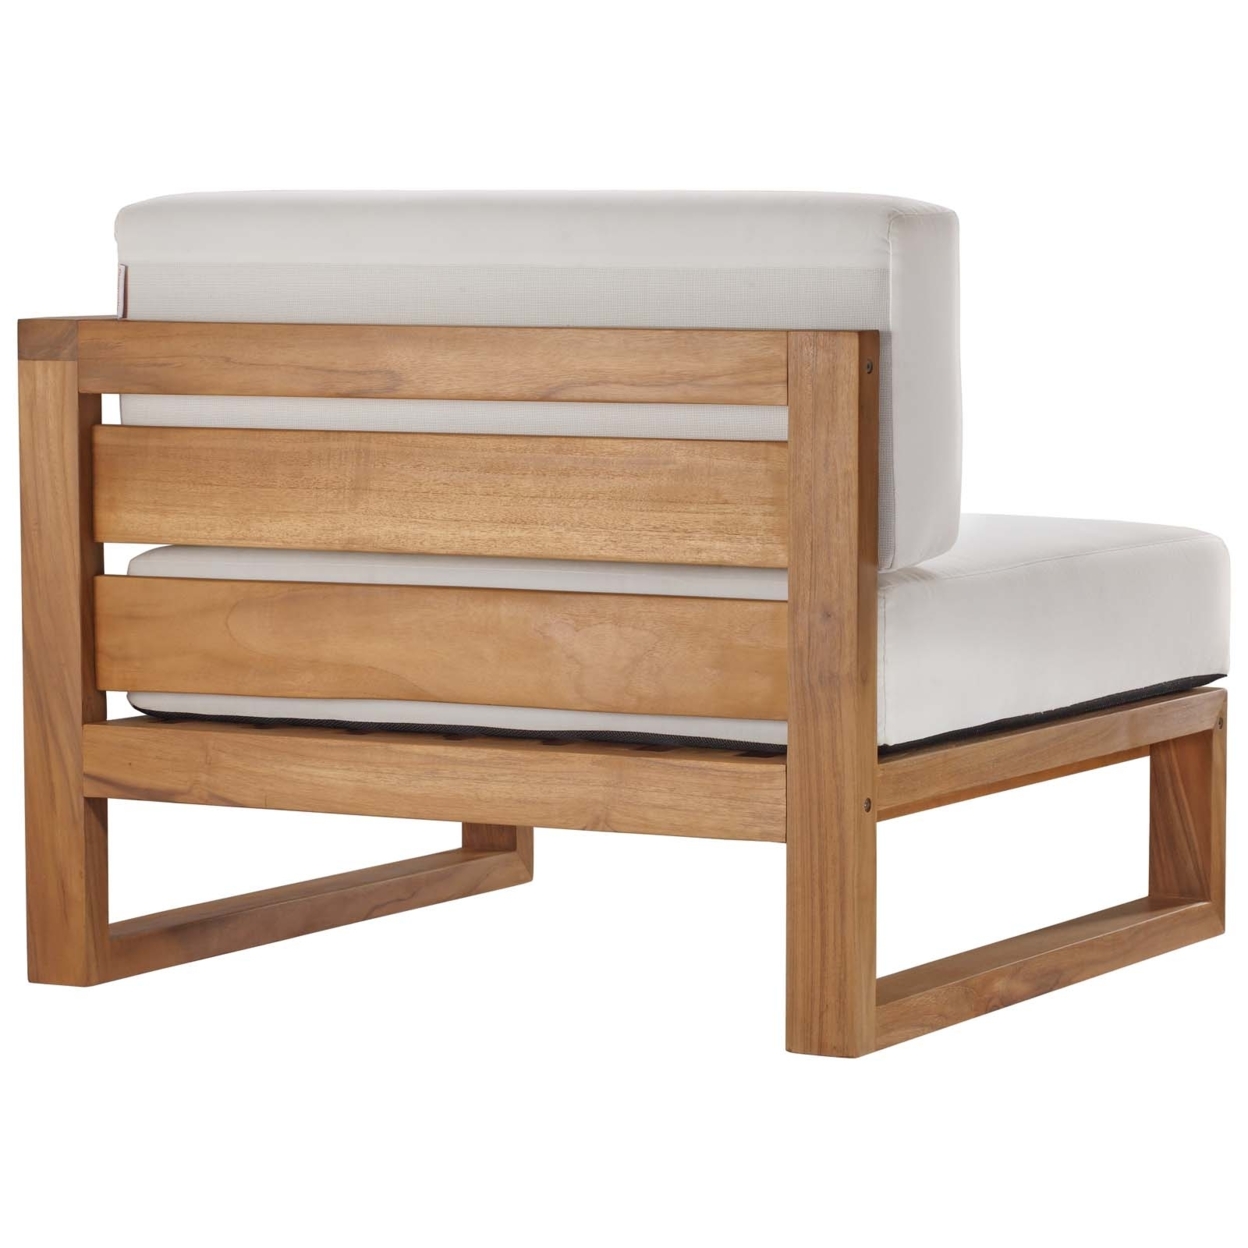 Upland Outdoor Patio Right-Arm Chair, Natural White